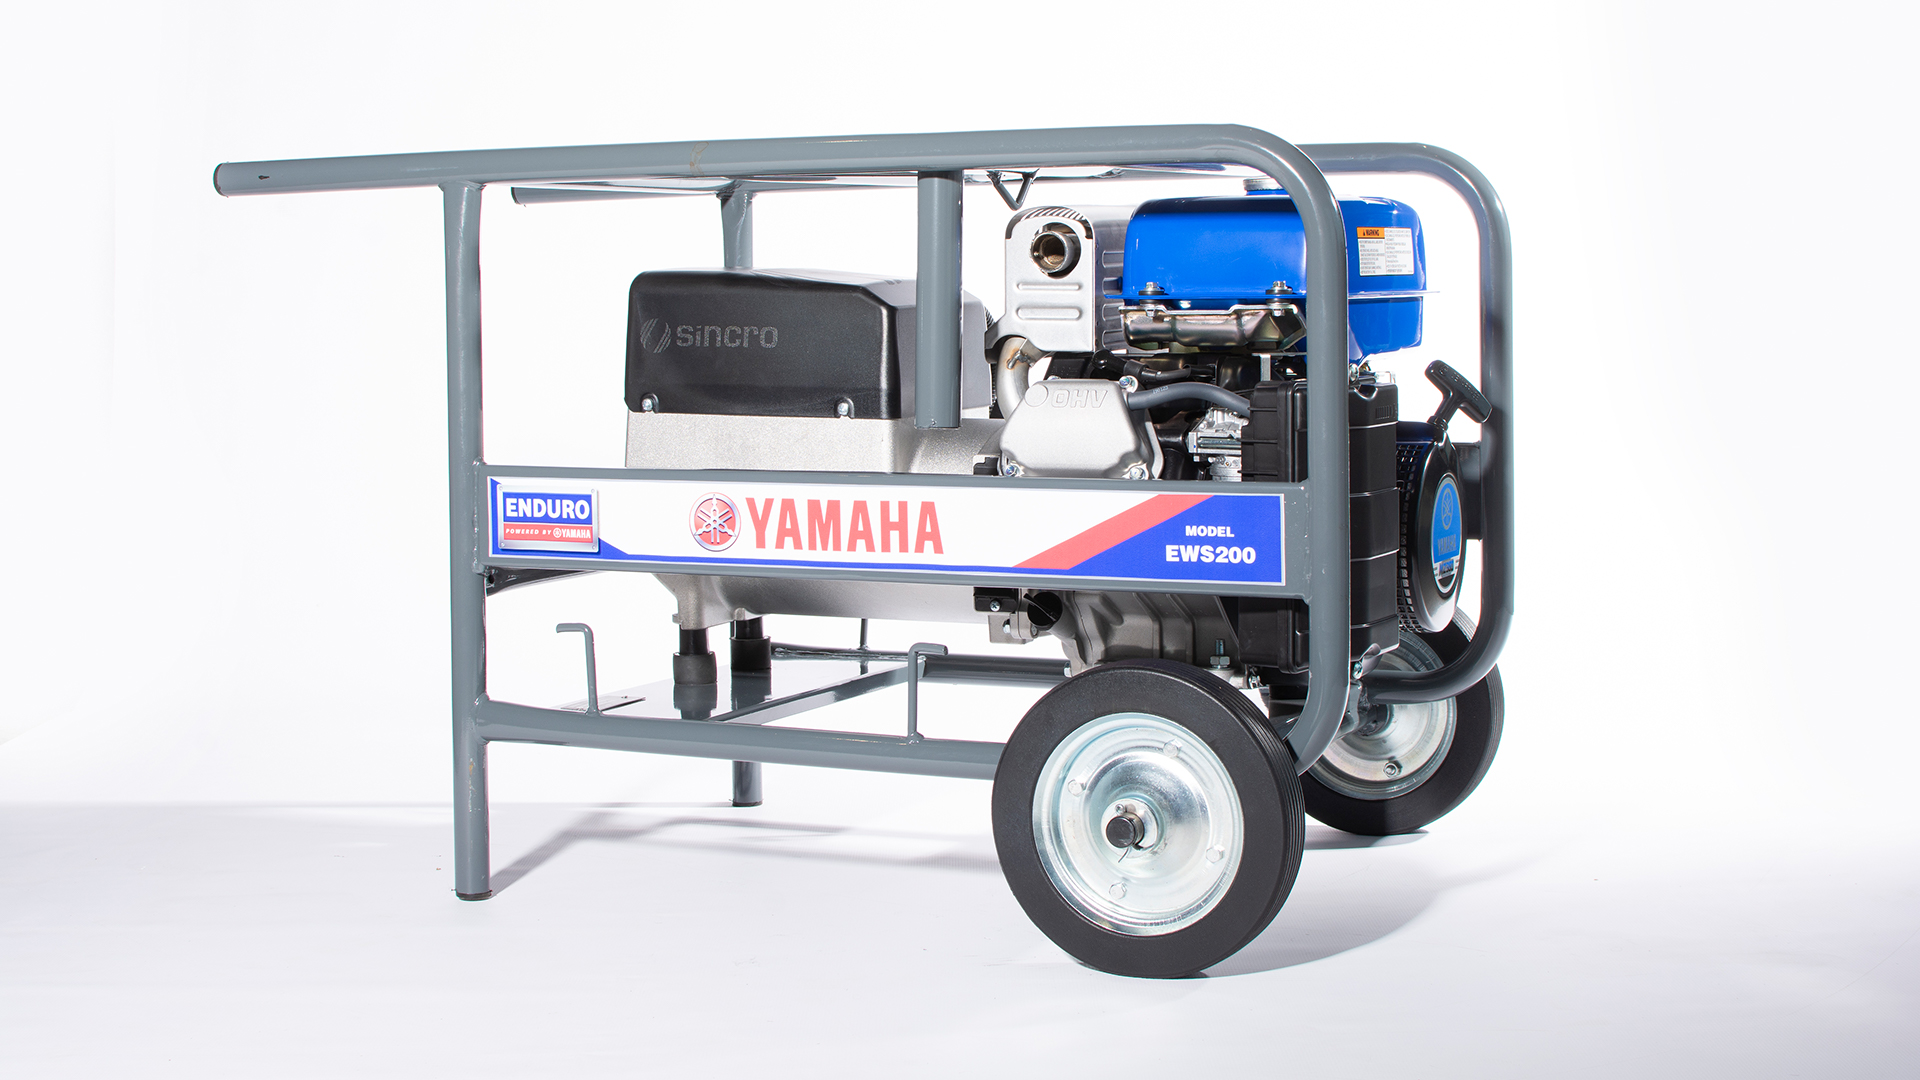 YAMAHA EWS200 GENERATOR  - THE PORTABLE MULTITASKER:
The EWS200 petrol driven welder combo is a maintenance free 5.5Kva generator with powerful 200Amp welder, fitted in an easily manoeuvrable frame featuring cable coiling and rod holders. 